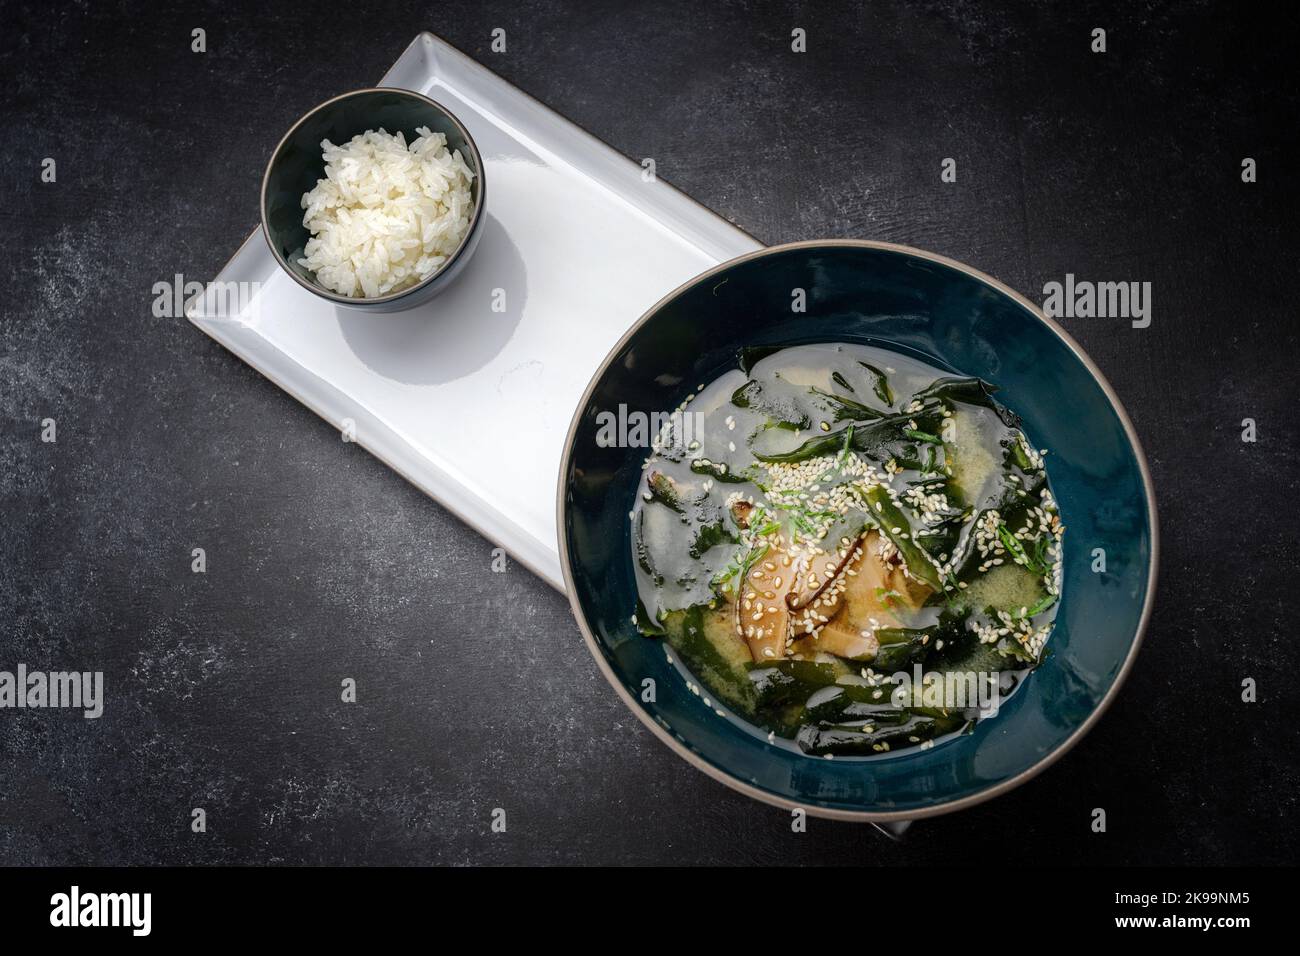 Miso soup with shiitake mushrooms and rice on a dark background Stock Photo